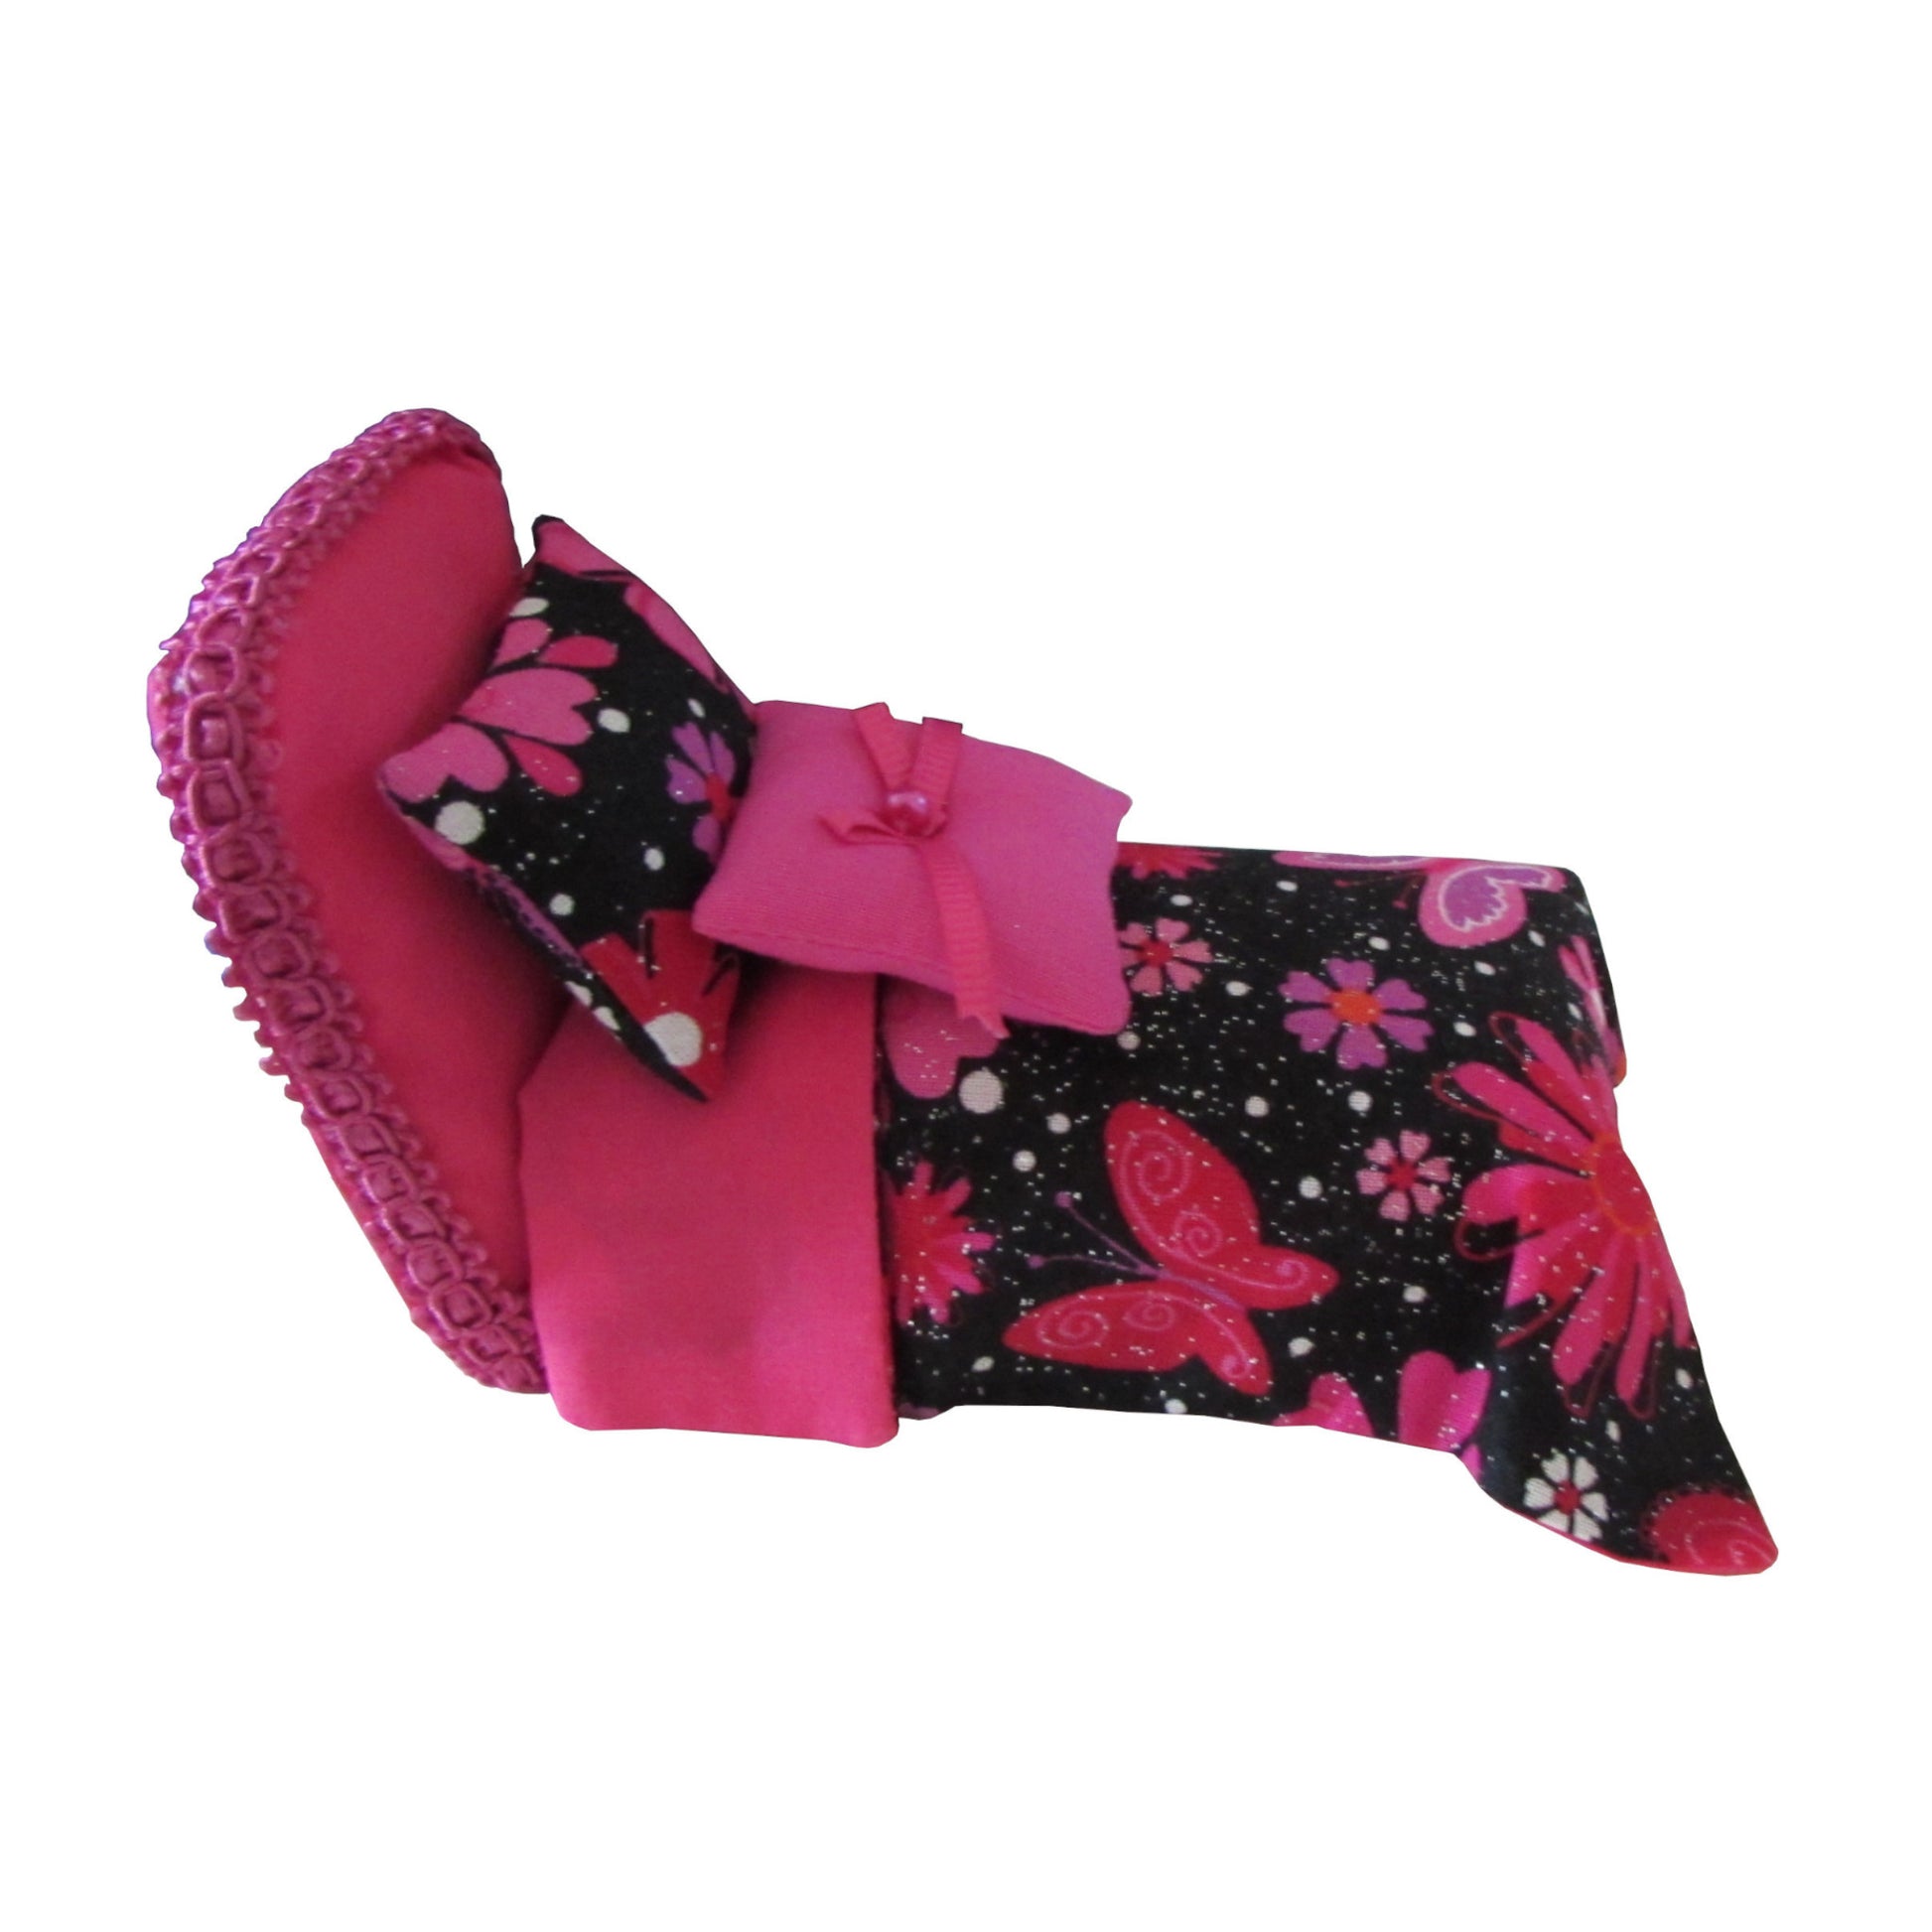 Pink Pincushion Bed with Metallic Butterfly Print Bedding Side view